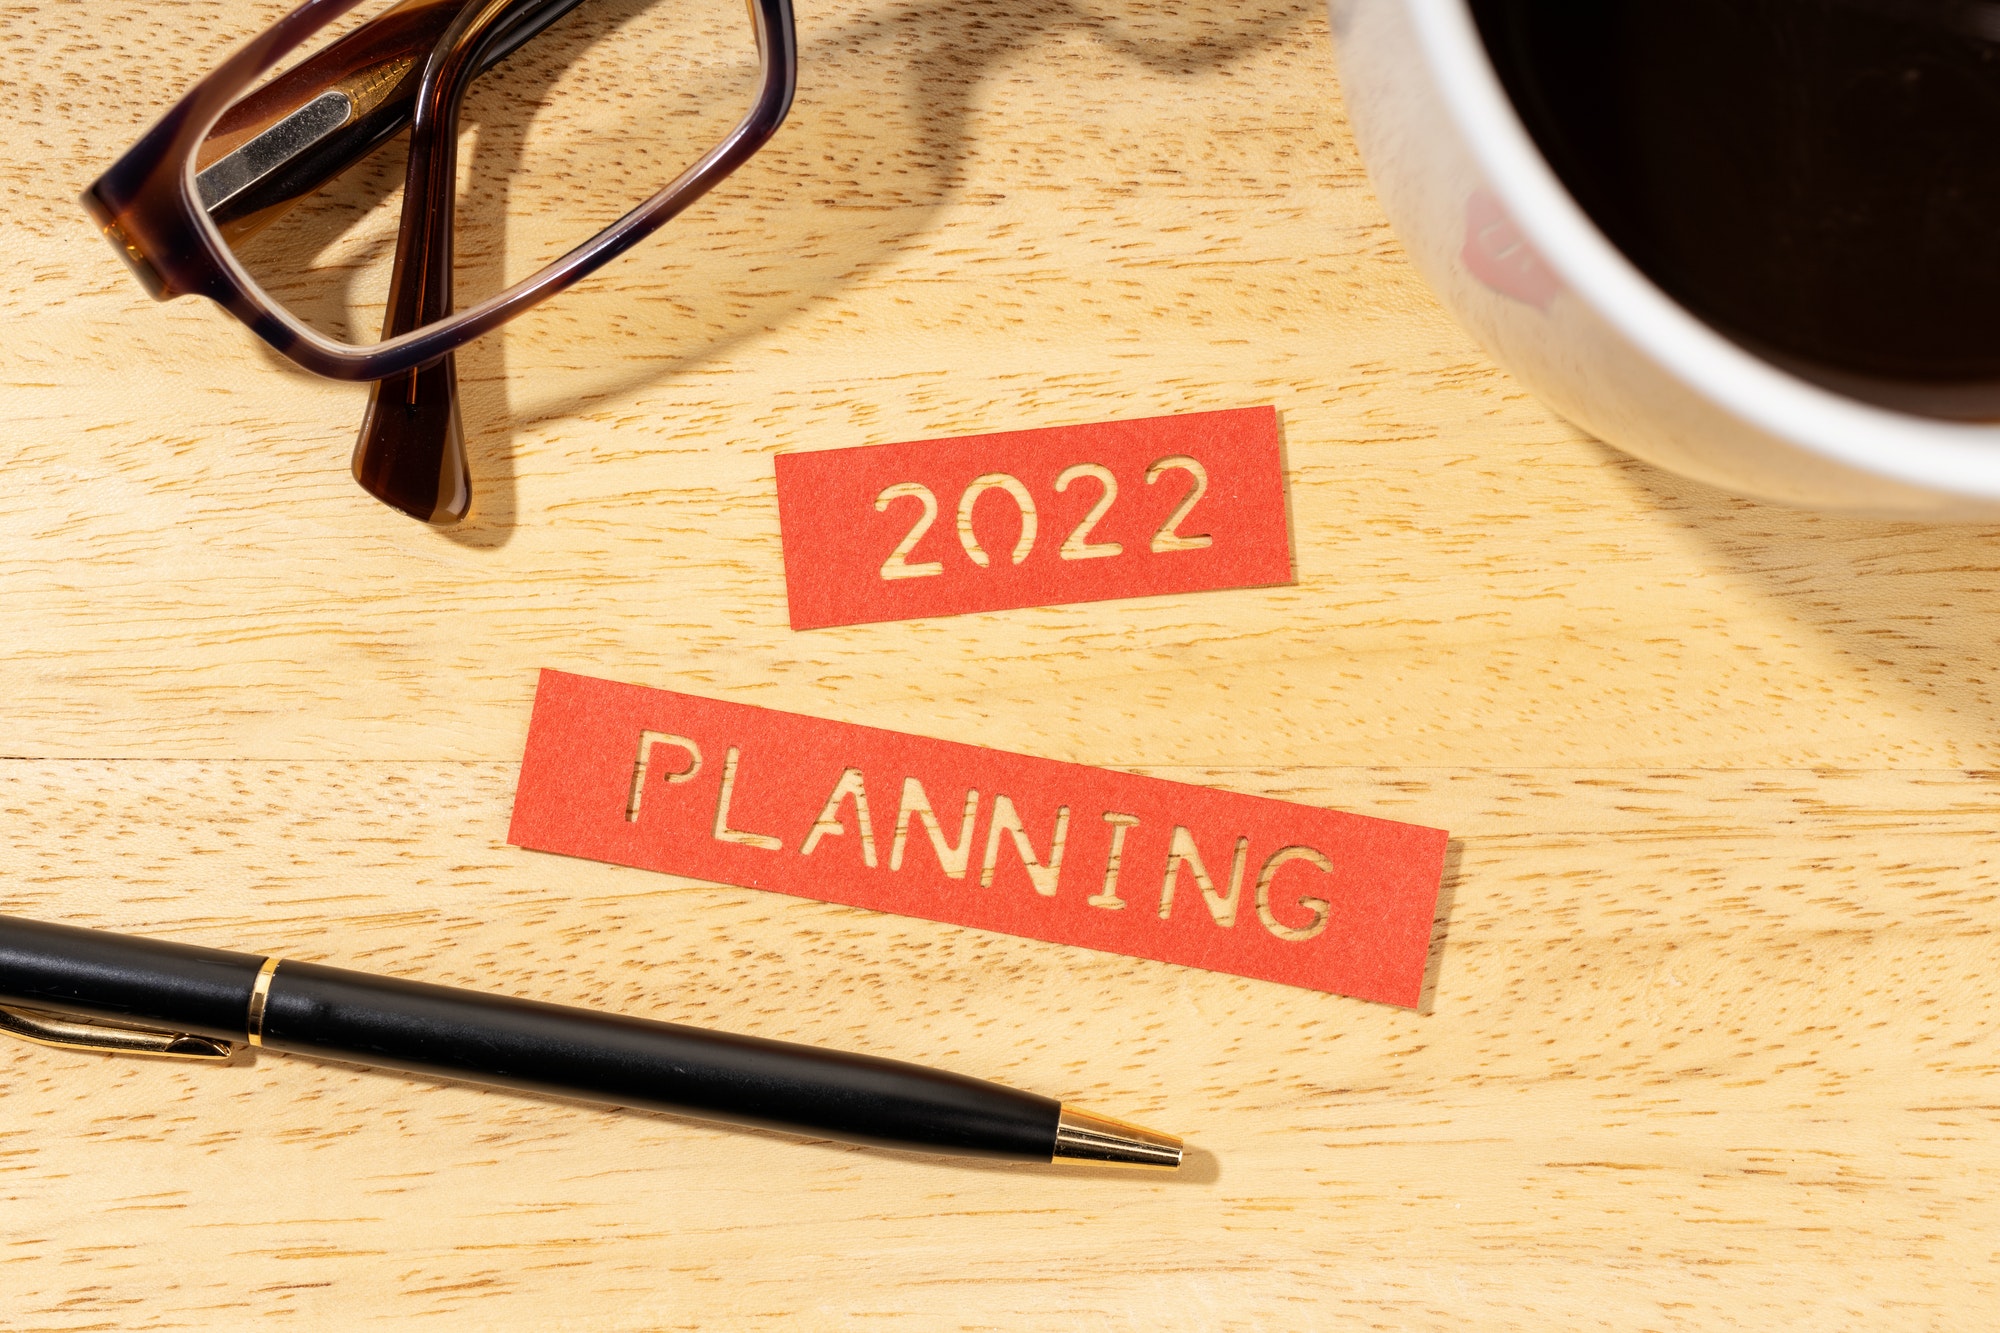 New year 2022 planning concept